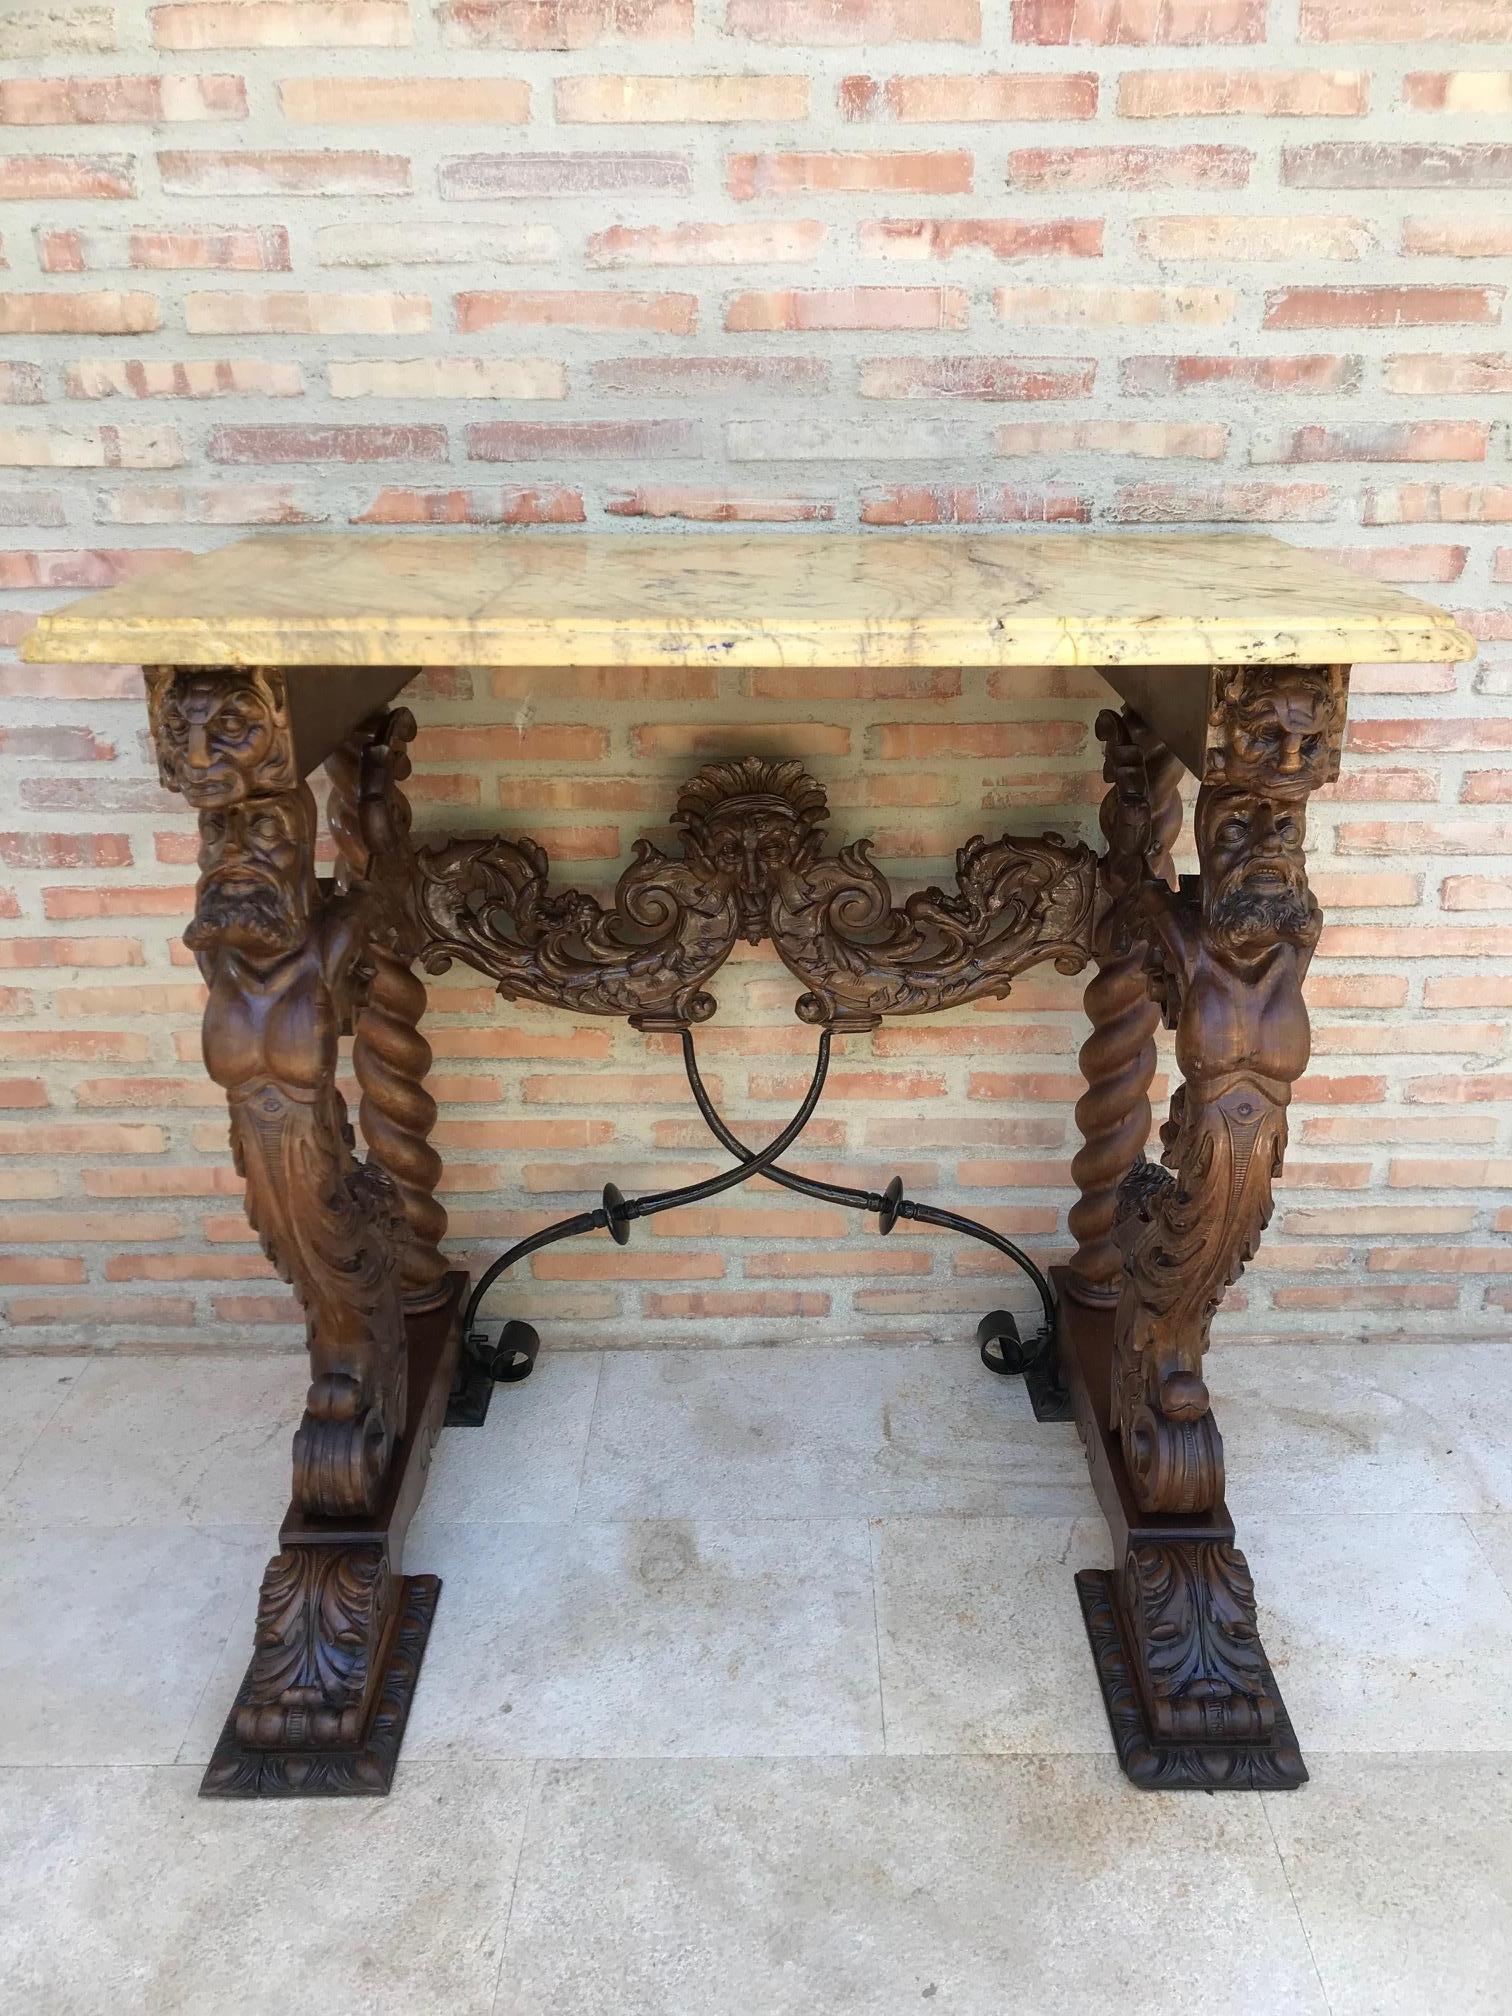 19th century console carved table Renaissance with beige marble top. 
Made of solid walnut wood with beige marble top. 
It features carvings of mythological animals and plant motifs. 
Foot with turned rear columns and front columns in the form of